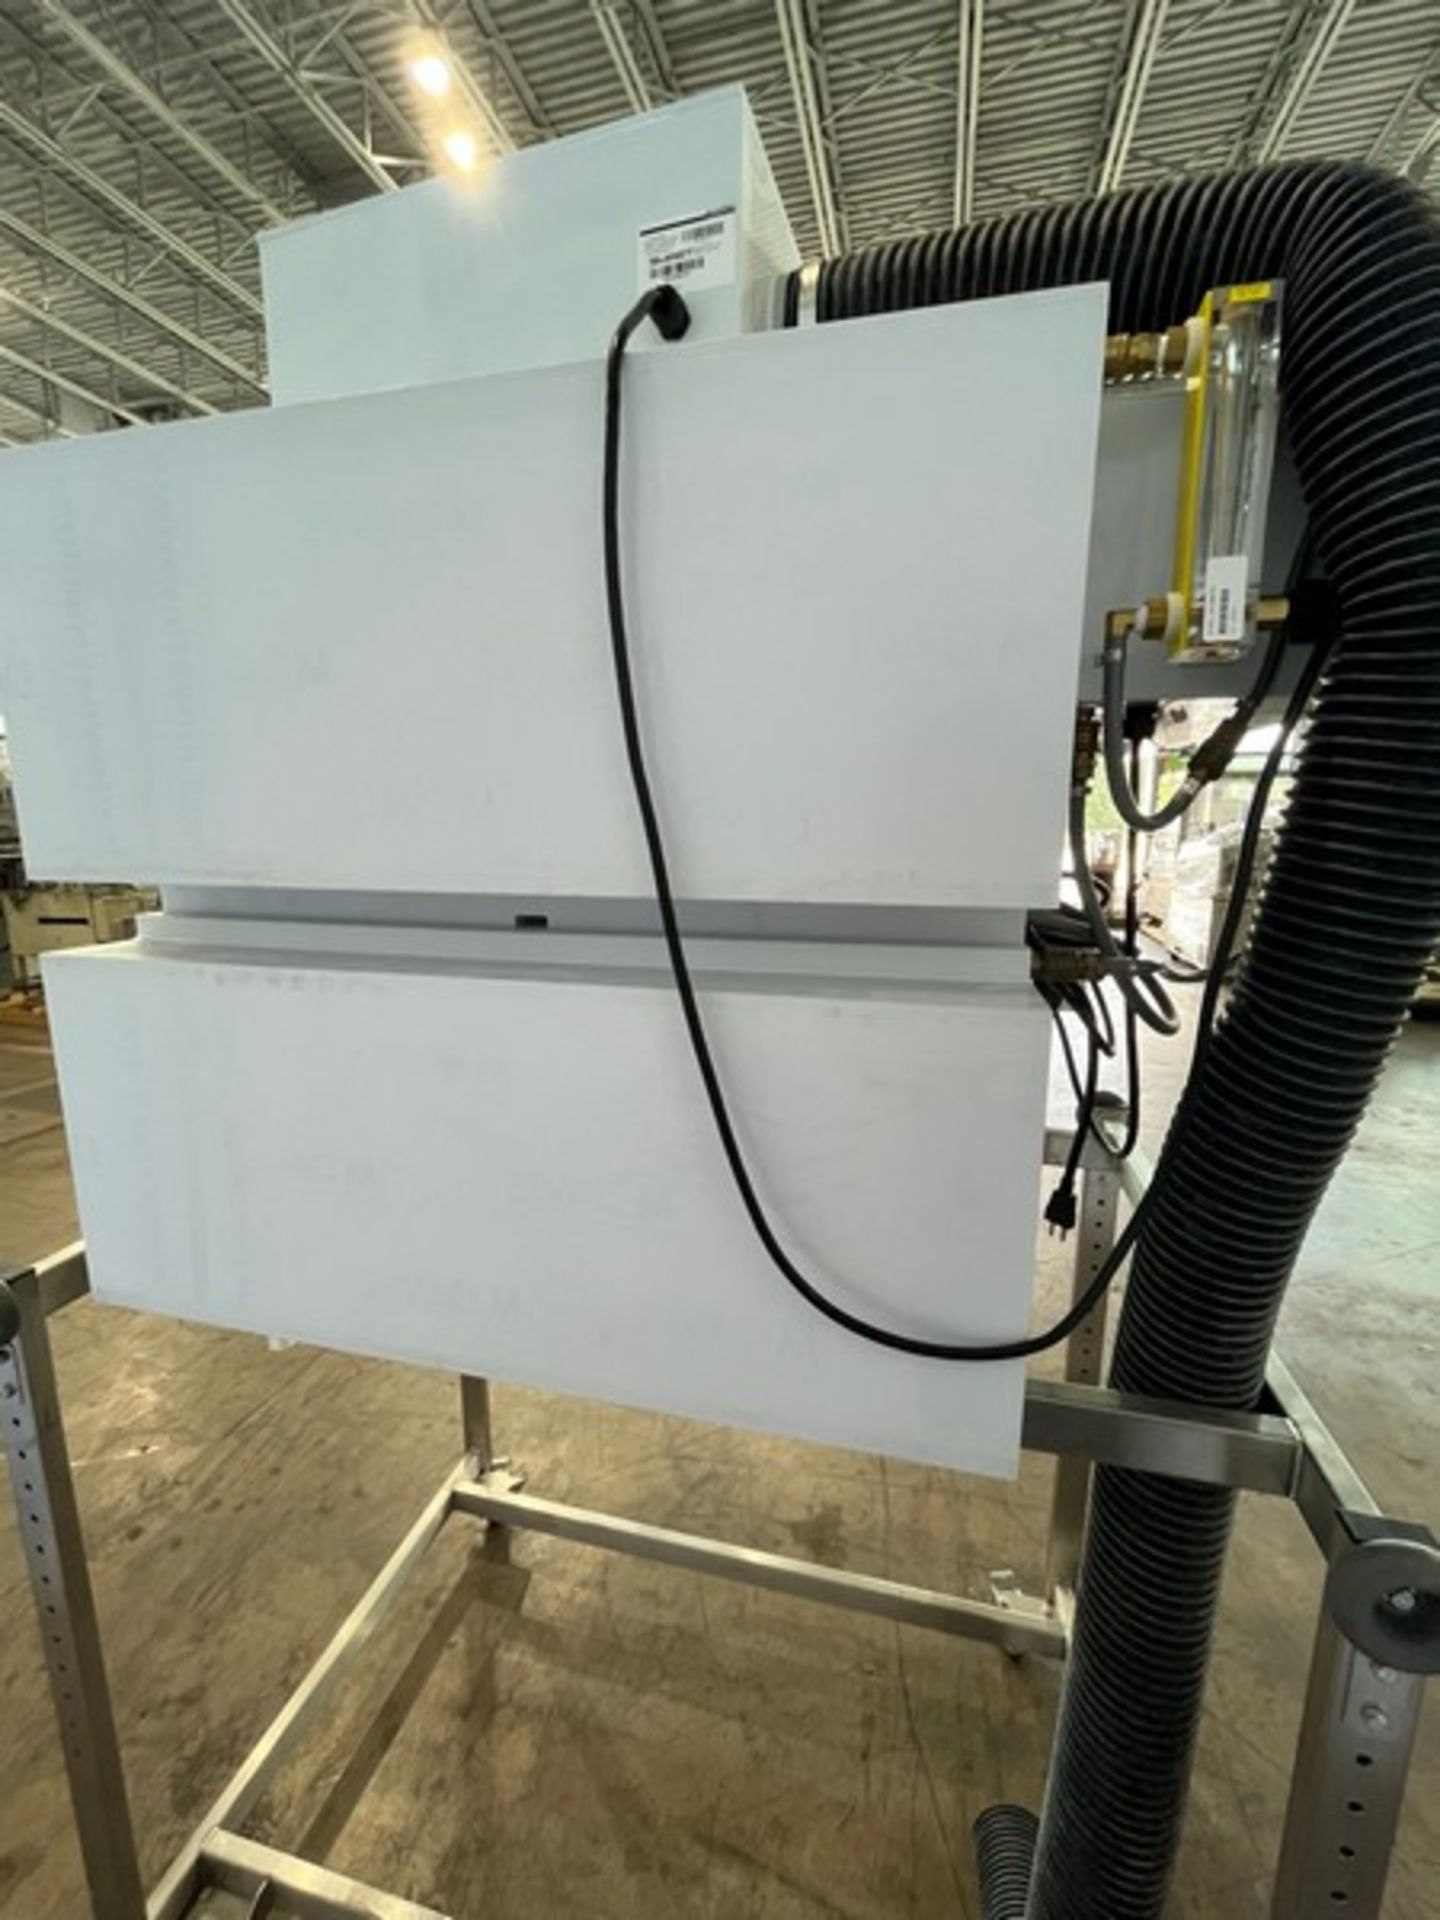 Emission testing chamber system clear acylic box EMISSION TESTING CHAMBER SYSTEM CLEAR ACYLIC BOX ( - Image 6 of 10